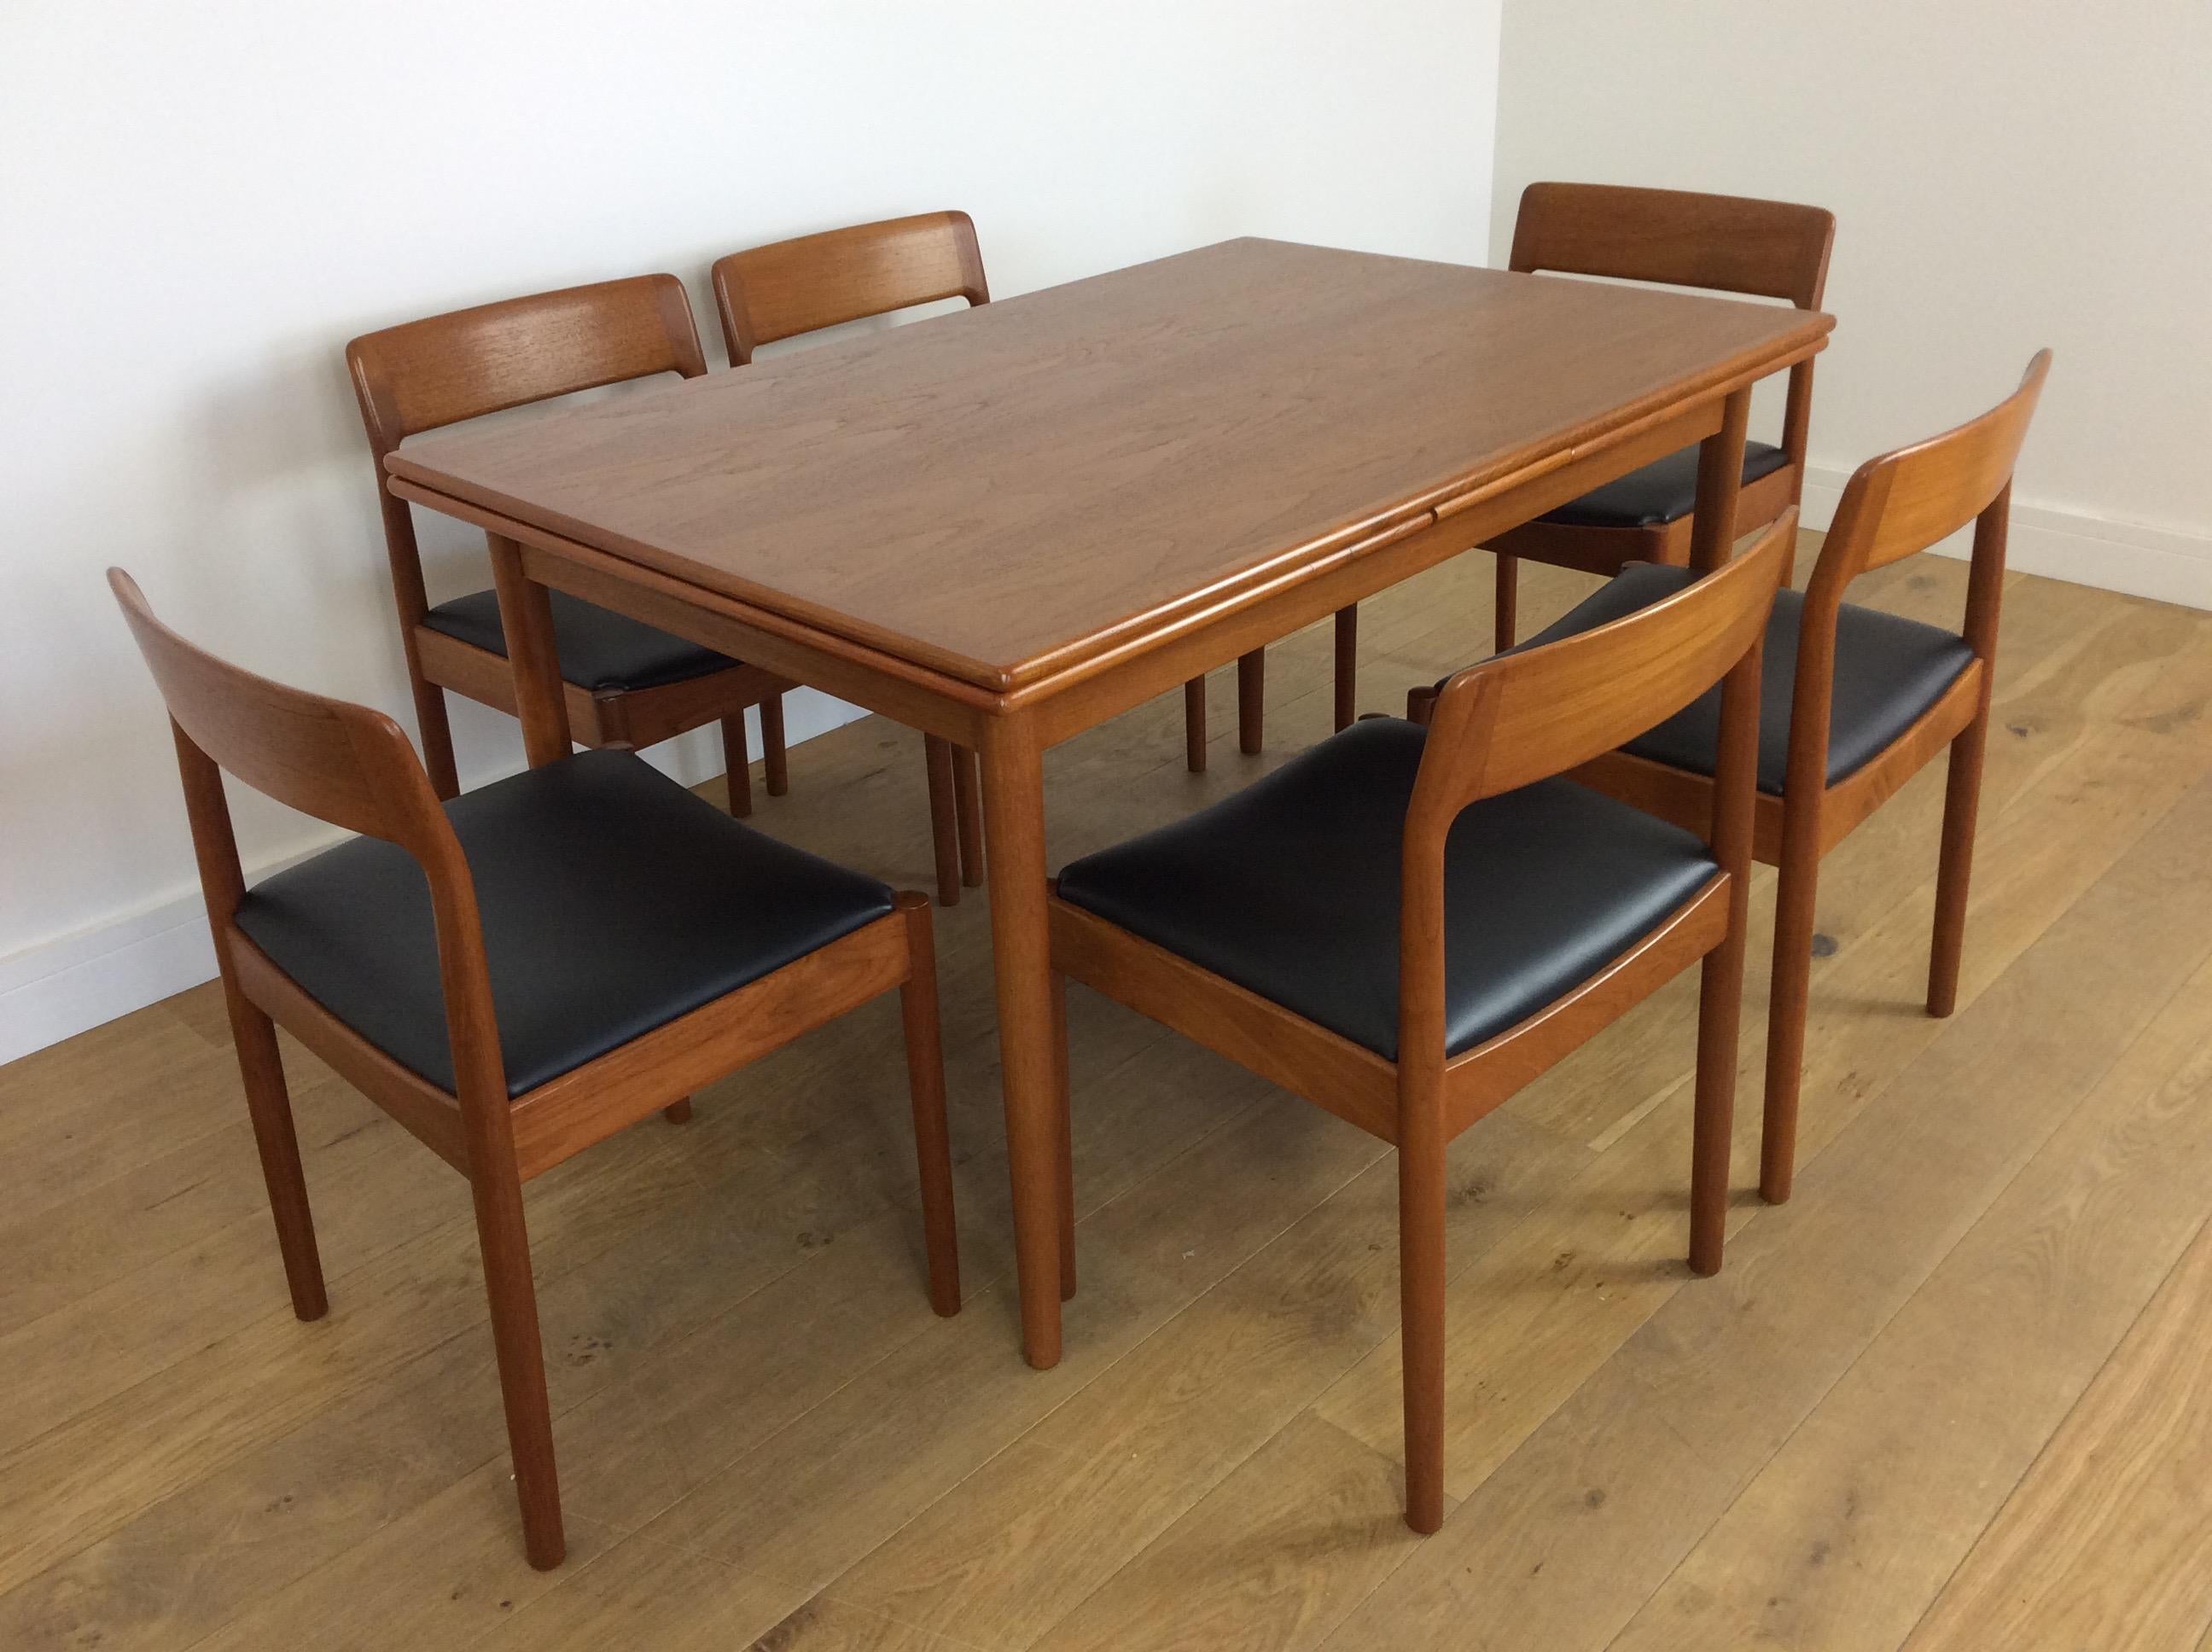 Midcentury extending dining table and six chairs.
Midcentury extendable dining table in beautiful teak wood, with six teak wood dining chairs newly upholstered in a black vinyl.
Designed by Niels Otto Moller for JL Møllers Møbelfabrik
Measures: